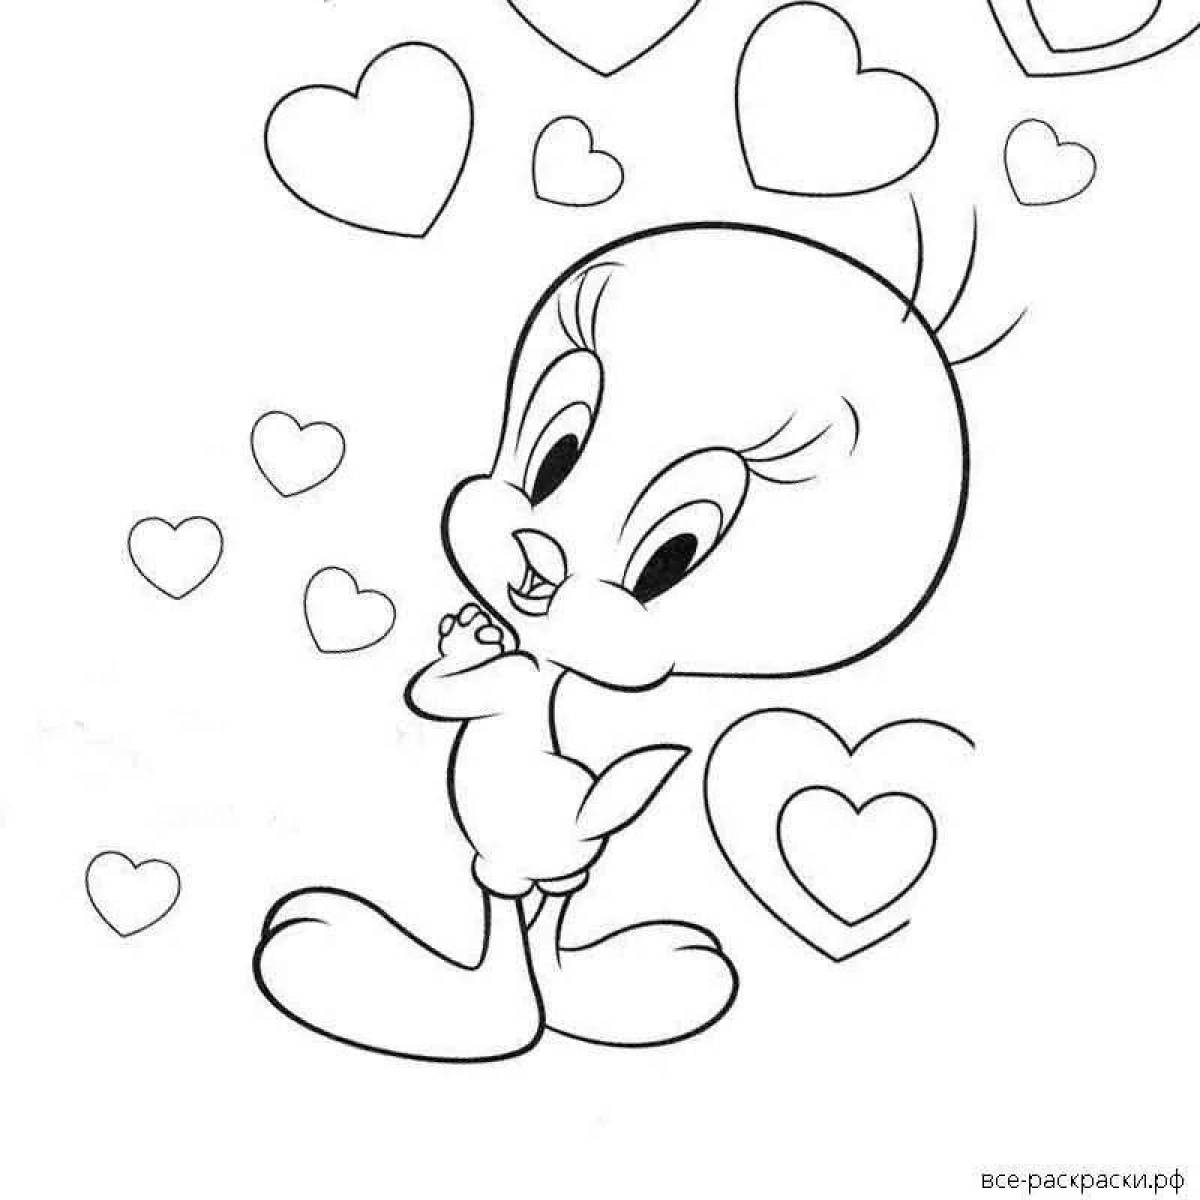 Cute bunny coloring book with heart